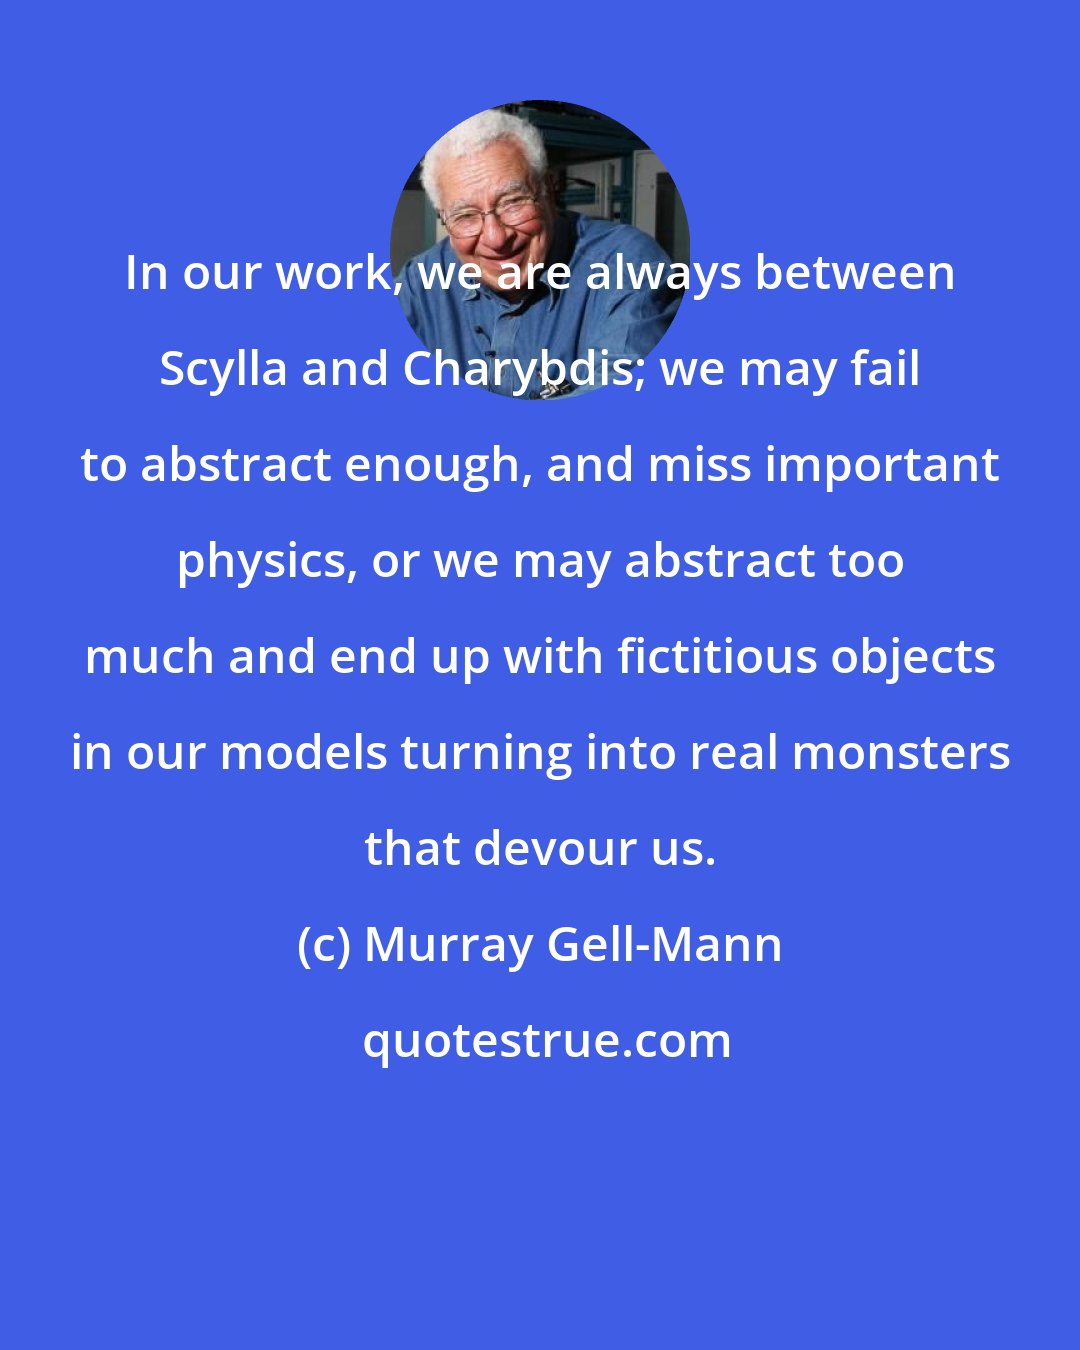 Murray Gell-Mann: In our work, we are always between Scylla and Charybdis; we may fail to abstract enough, and miss important physics, or we may abstract too much and end up with fictitious objects in our models turning into real monsters that devour us.